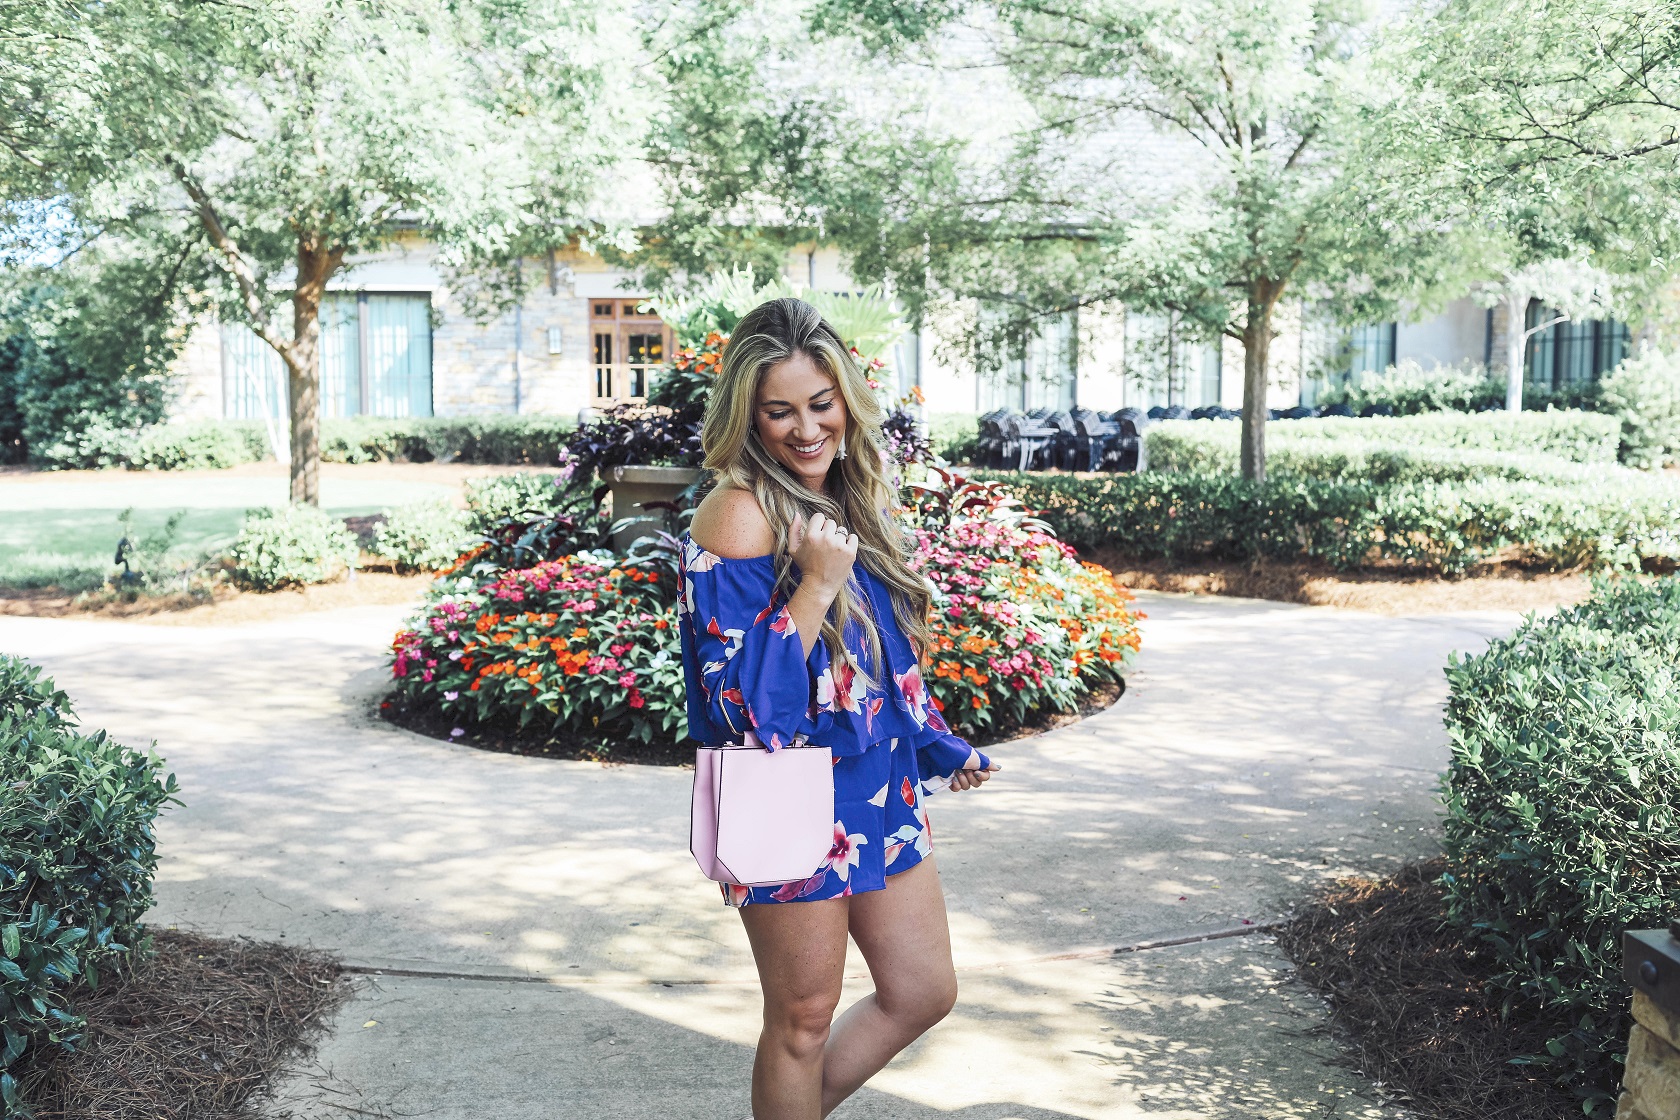 Super Cute Off the Shoulder Floral Romper from the Pink Lily Boutique featured by popular fashion blogger, Walking in Memphis in High Heels